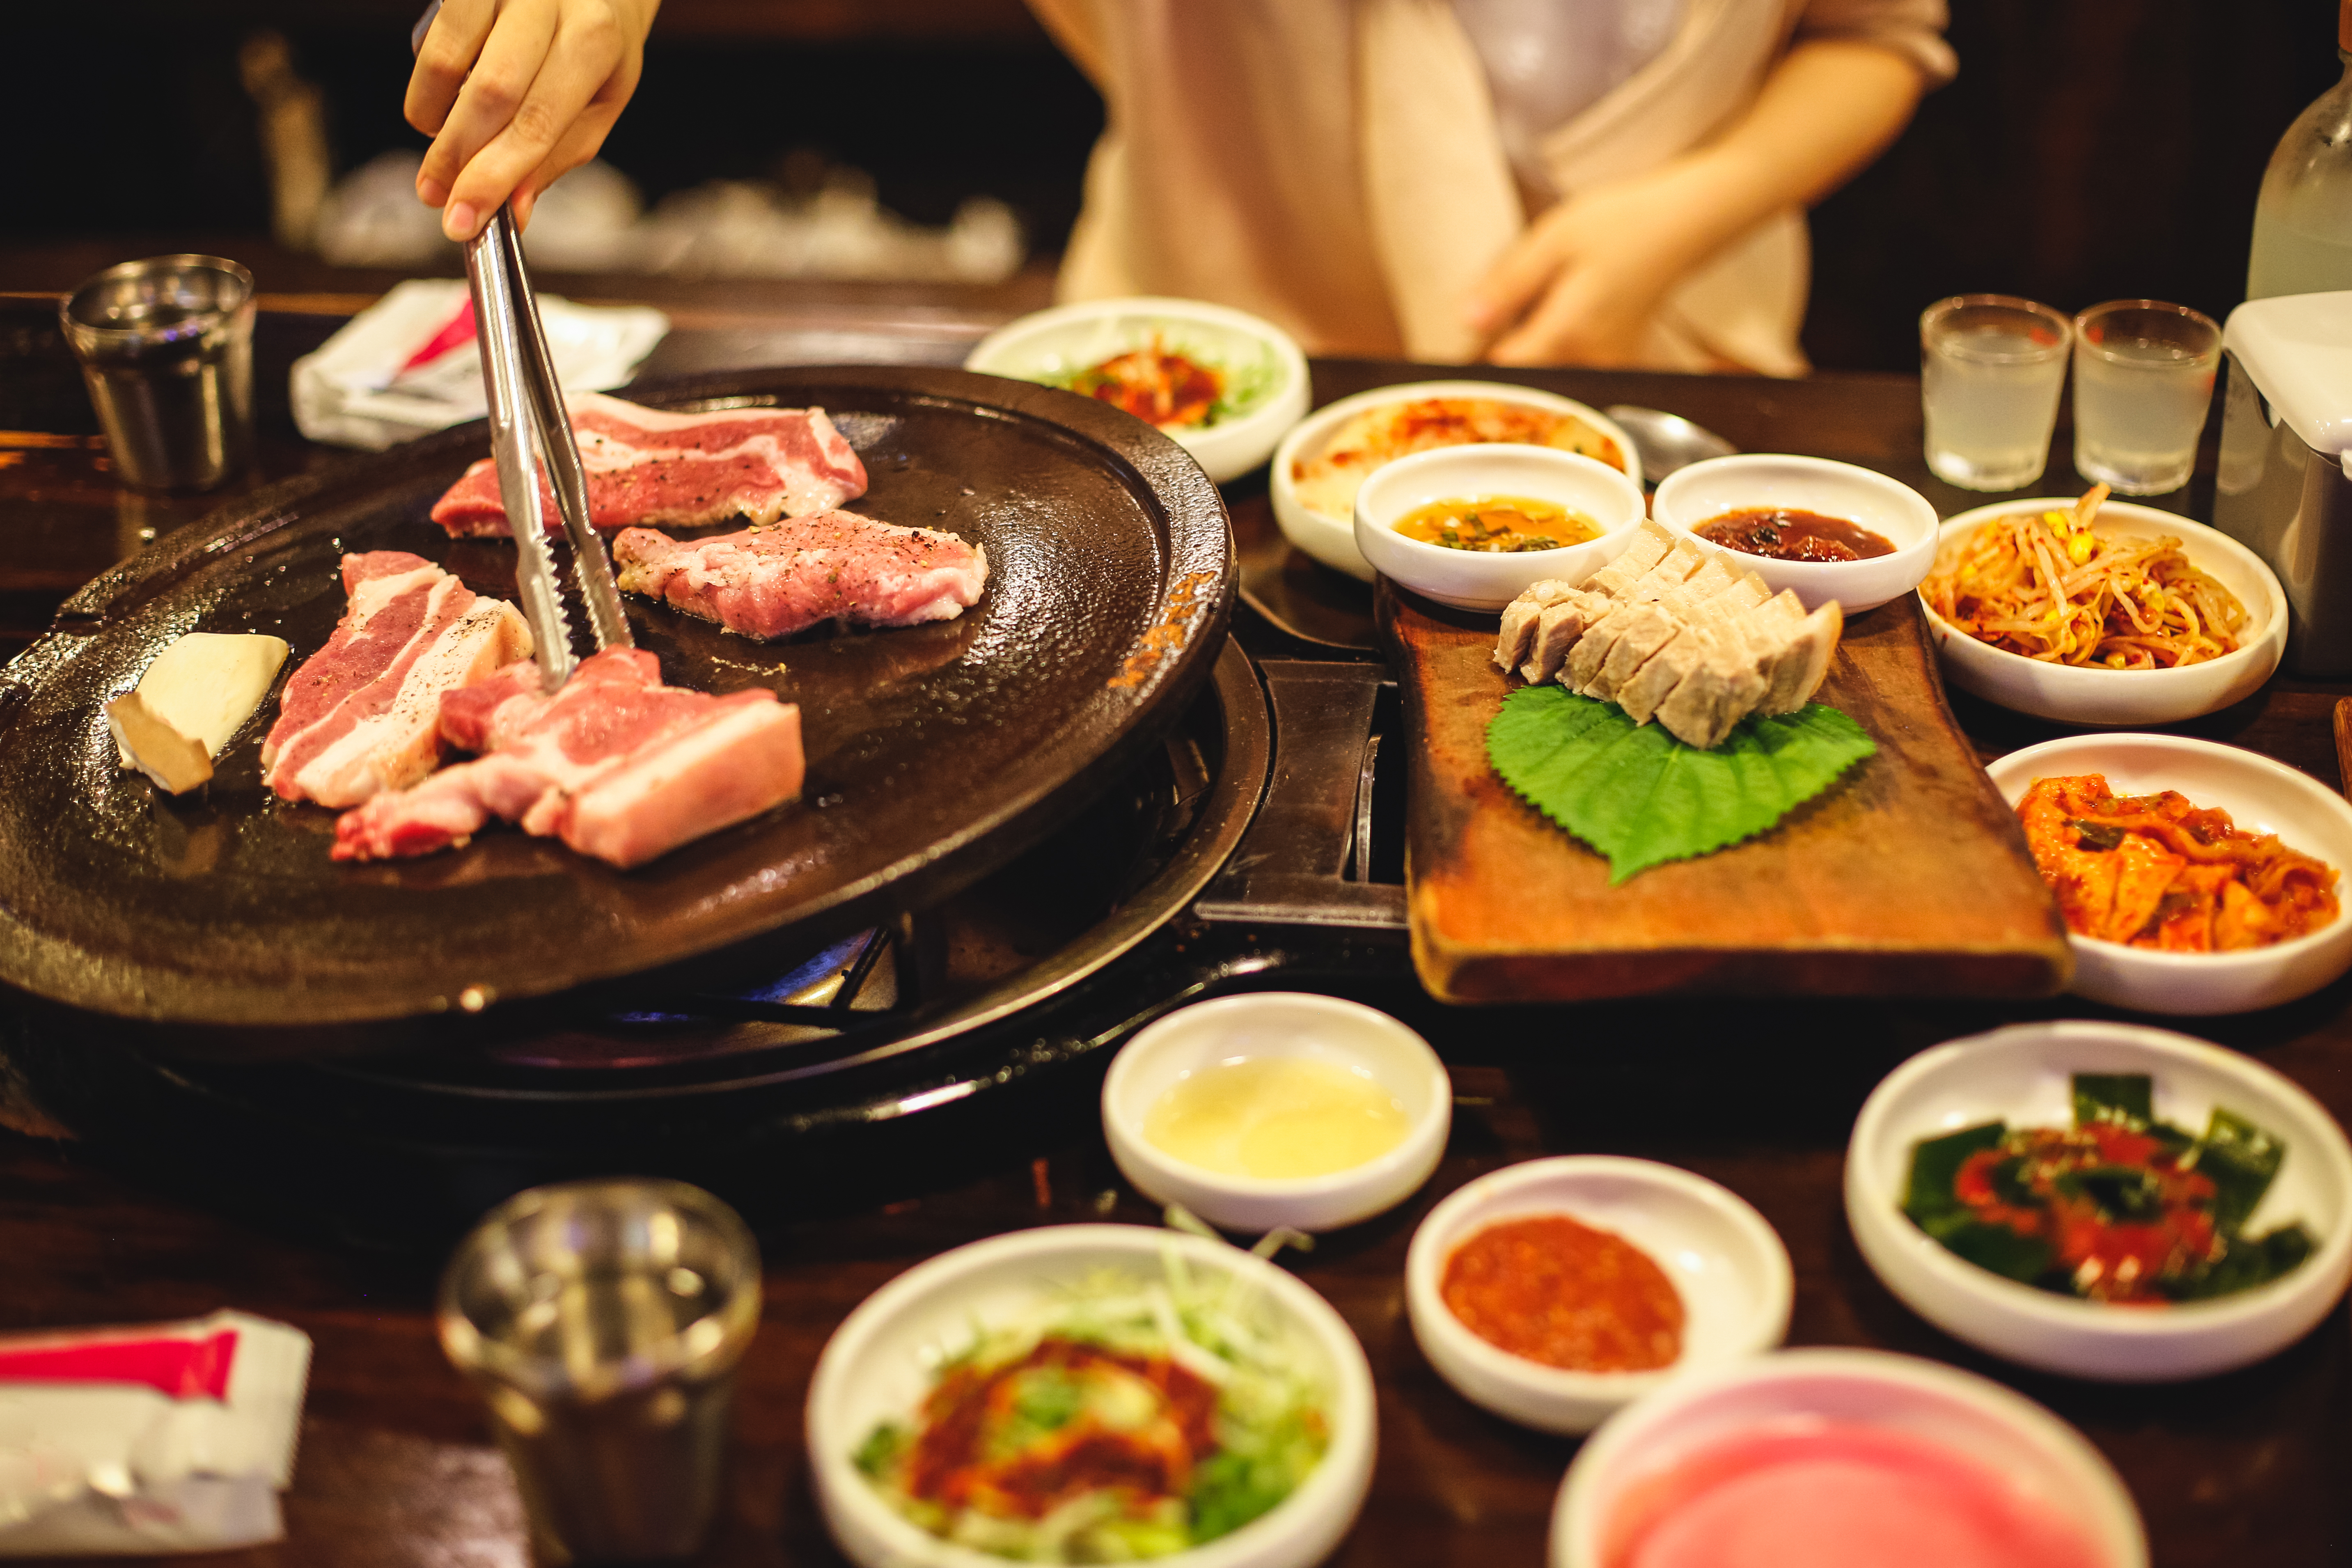 Korean barbecue setup | Source: Getty Images